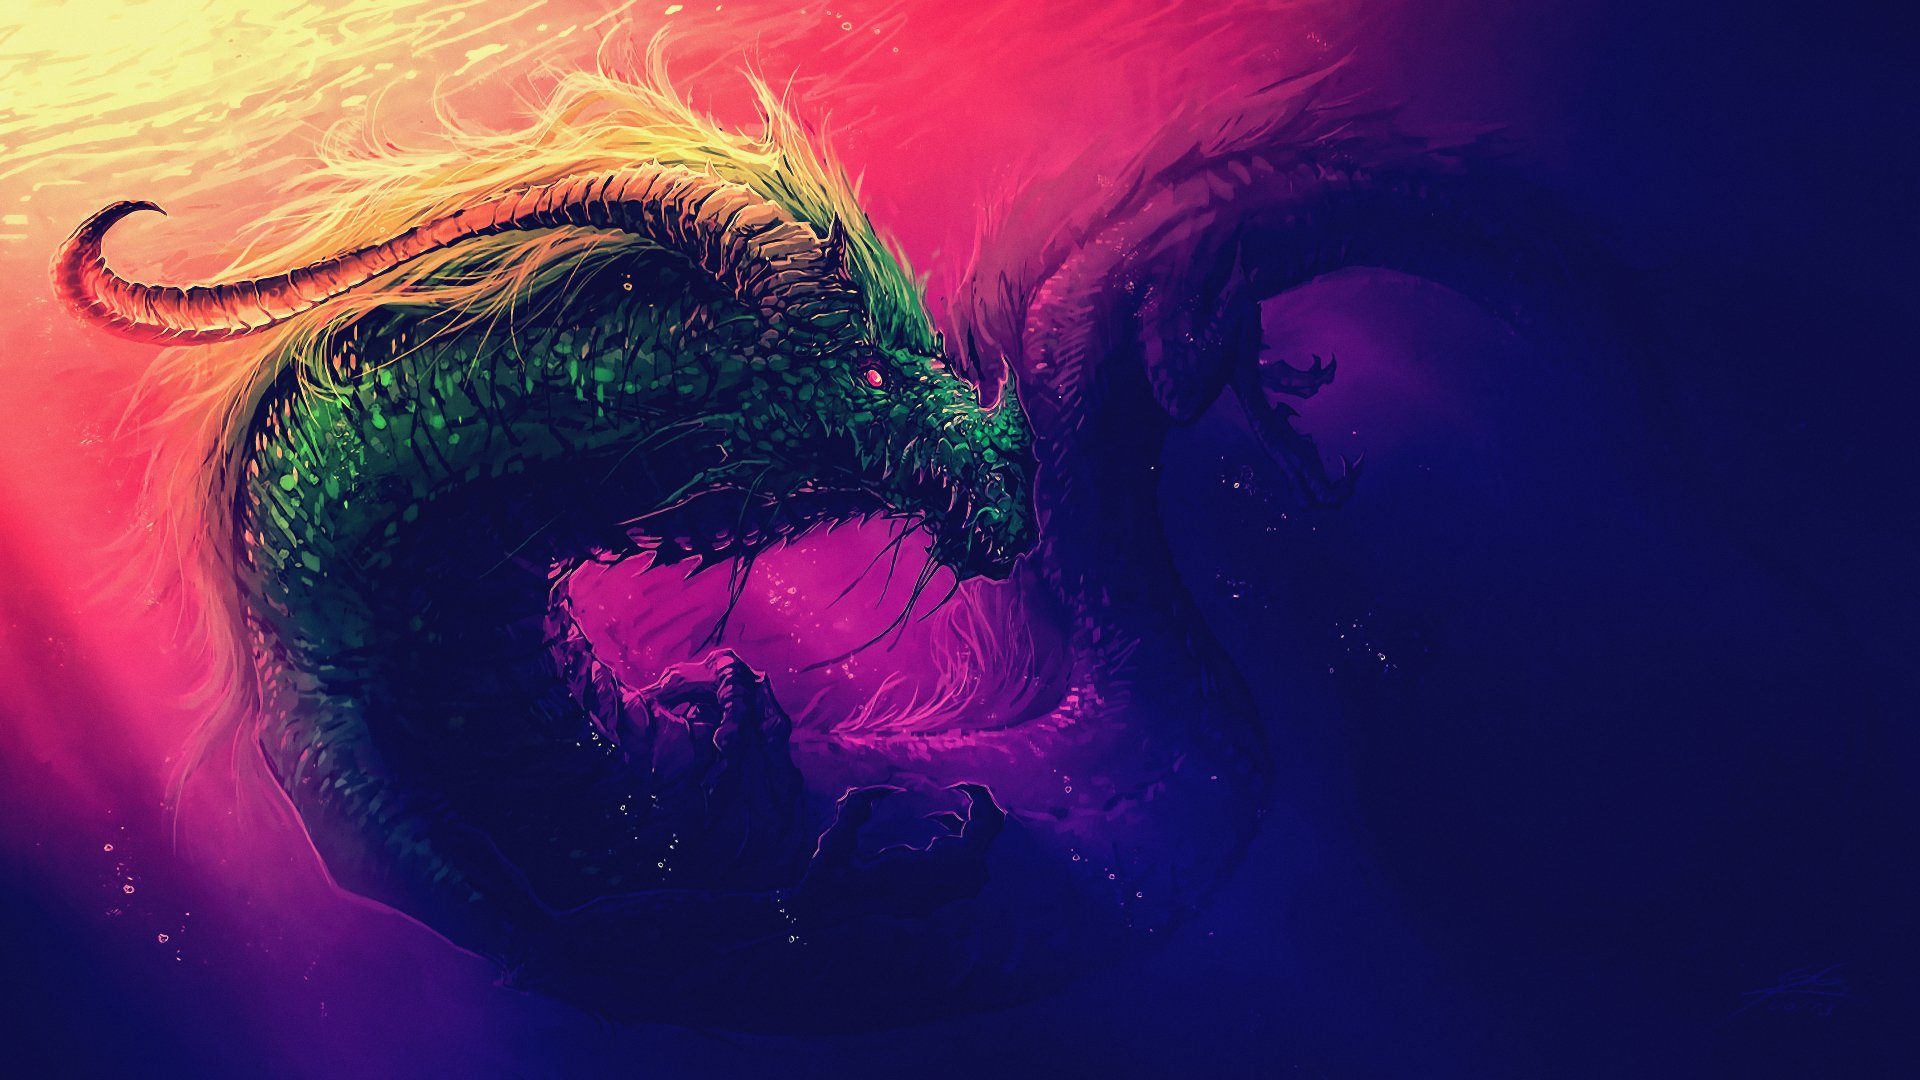 4K Ultra HD Dragon Wallpapers Backgrounds